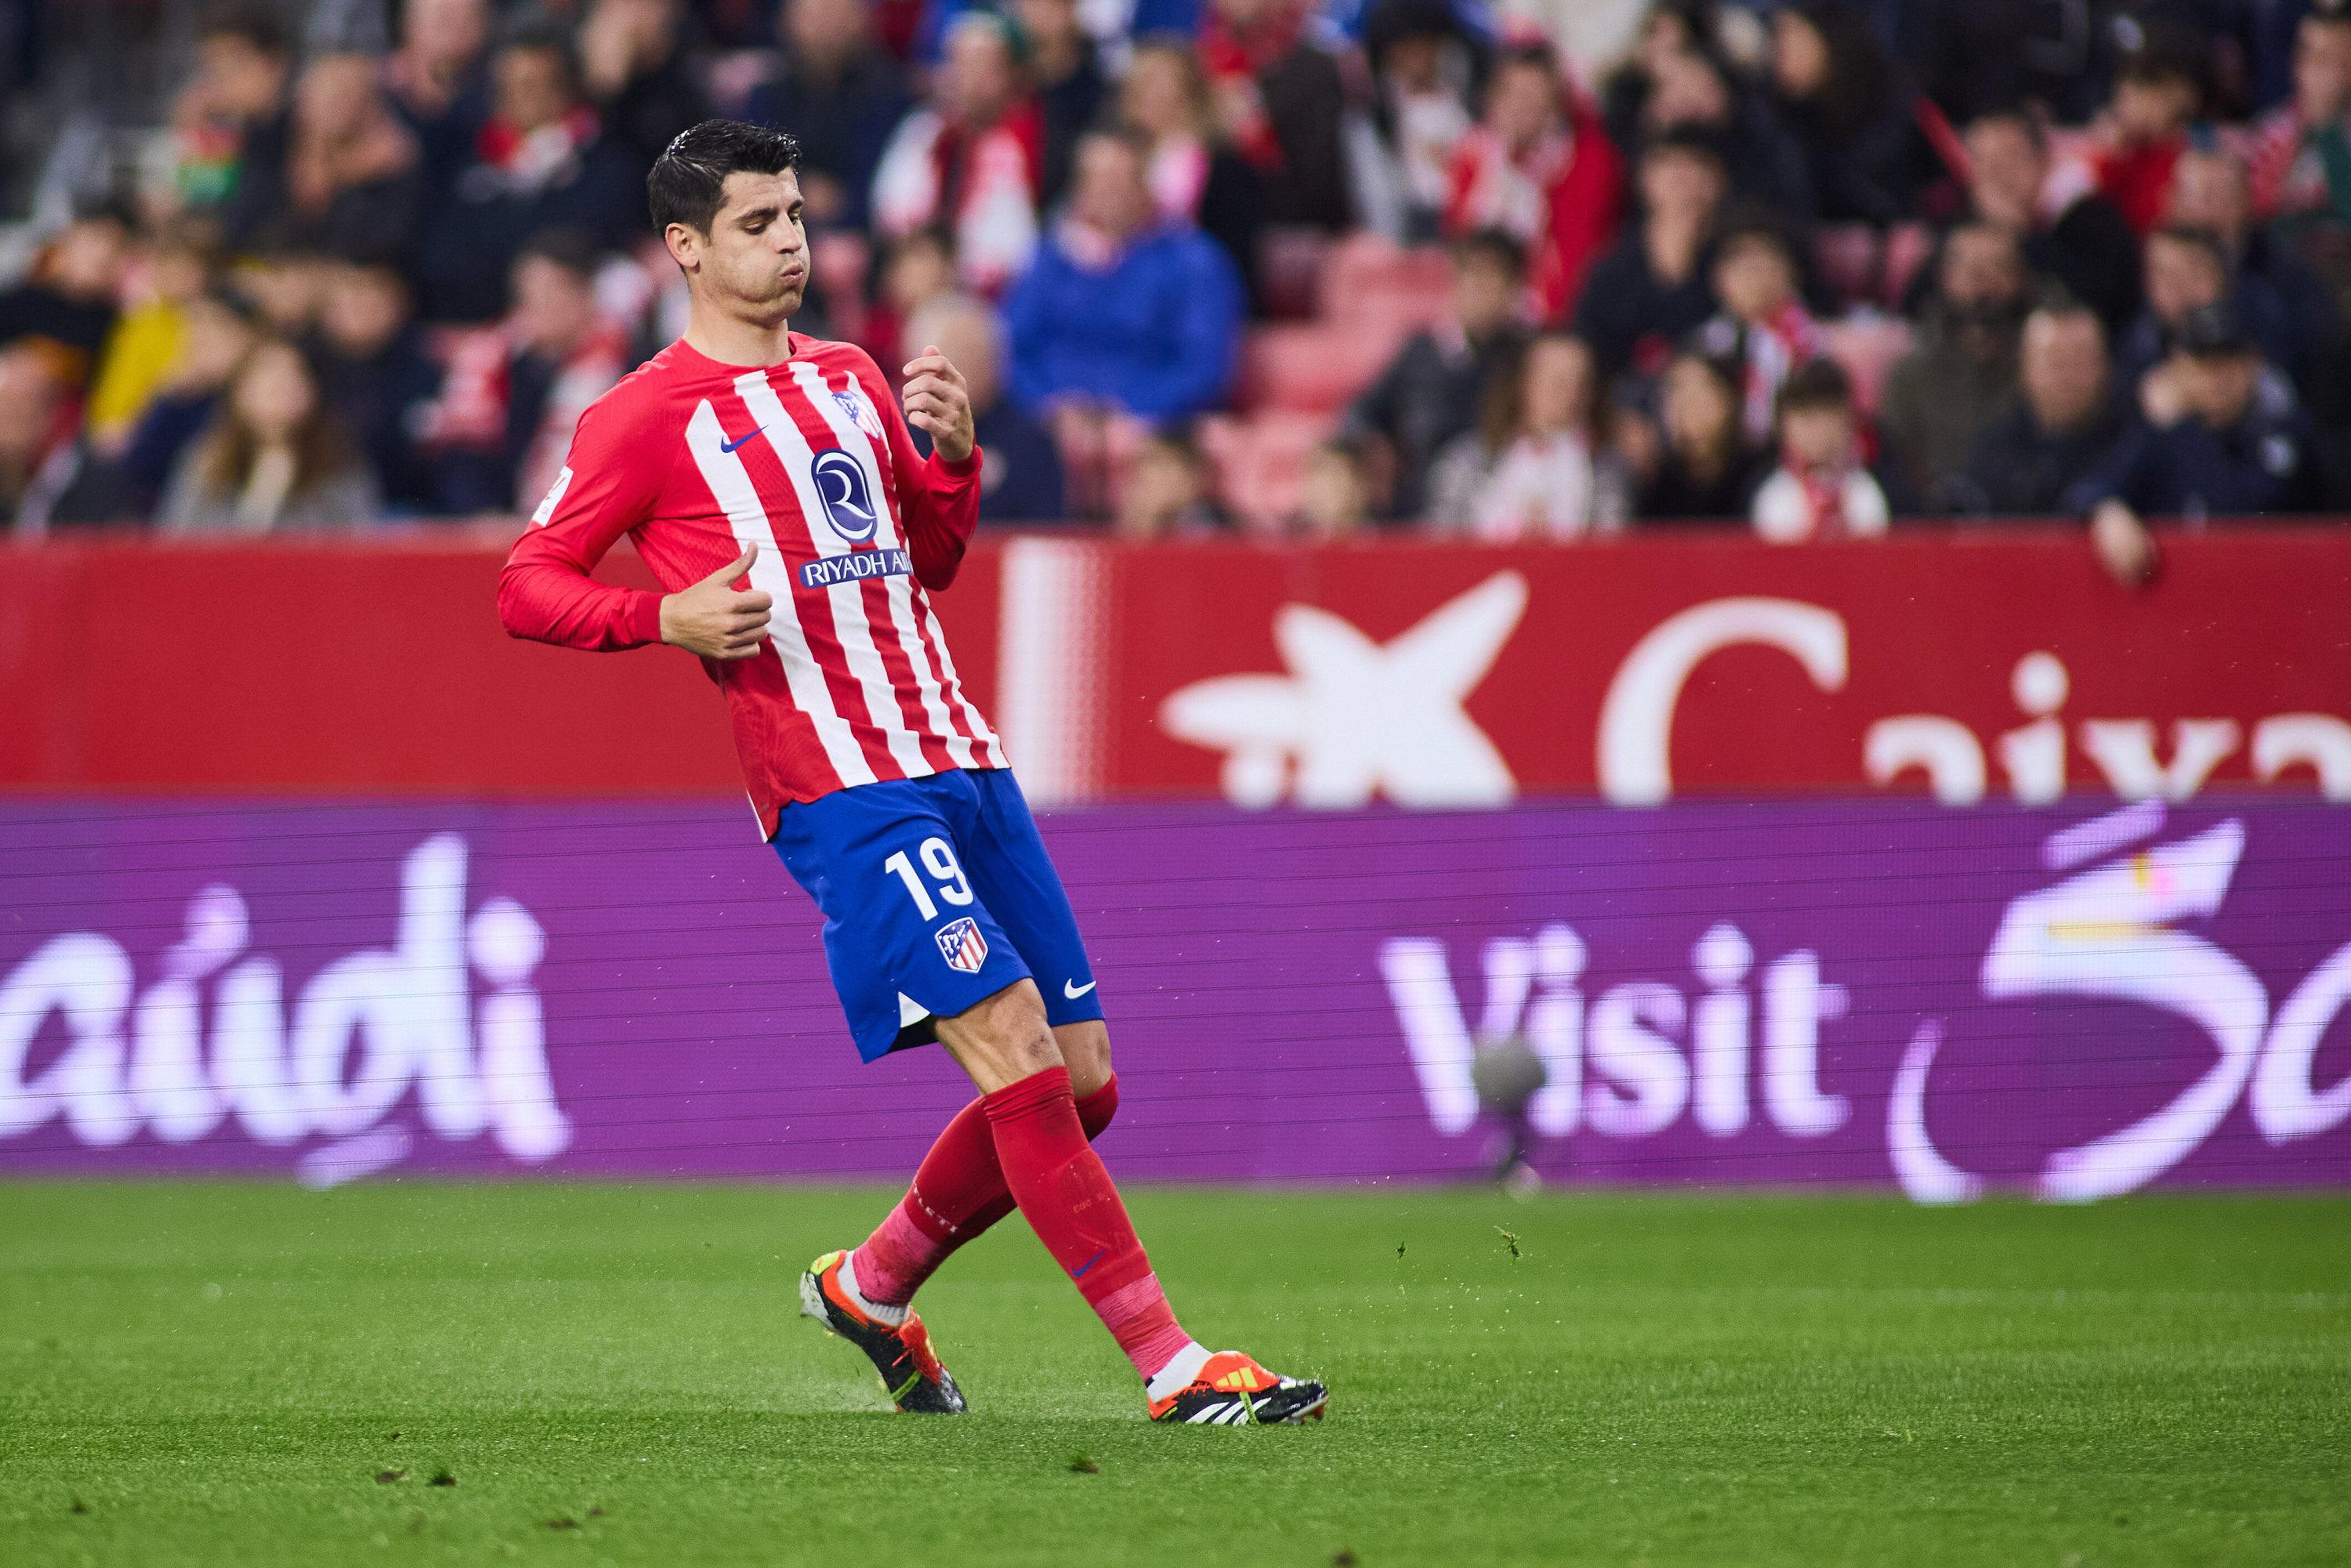 Liga: Alvaro Morata injured in the knee will miss several weeks of competition